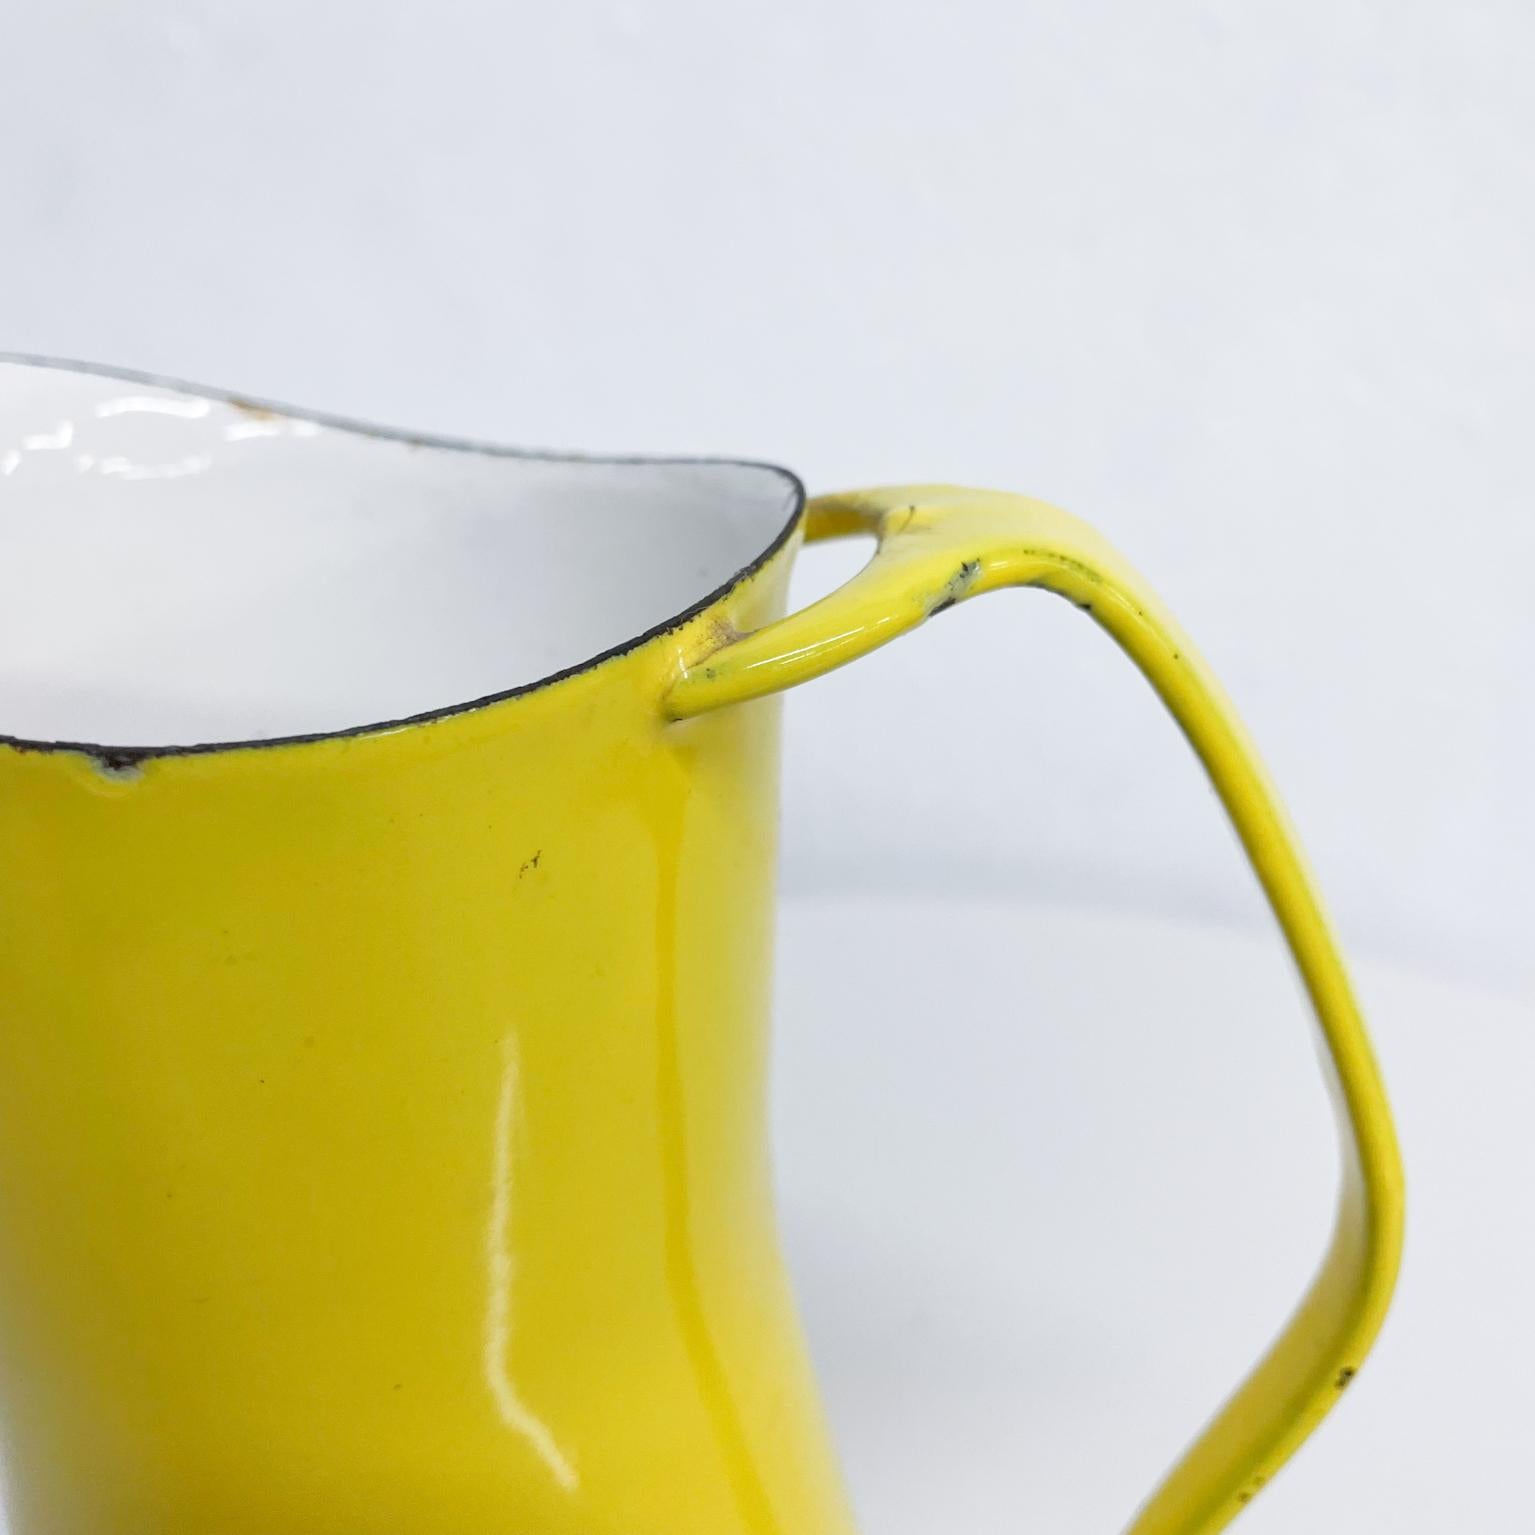 By Danish designer Jens Quistgaard for Dansk designs vintage pitcher in bright yellow enamel with white interior.
A Dansk Designs Denmark IHQ piece Mid-Century Modern 1960s
Dimensions: 8.25 tall x 5.5 depth x 4 in diameter.
Wear consistent with